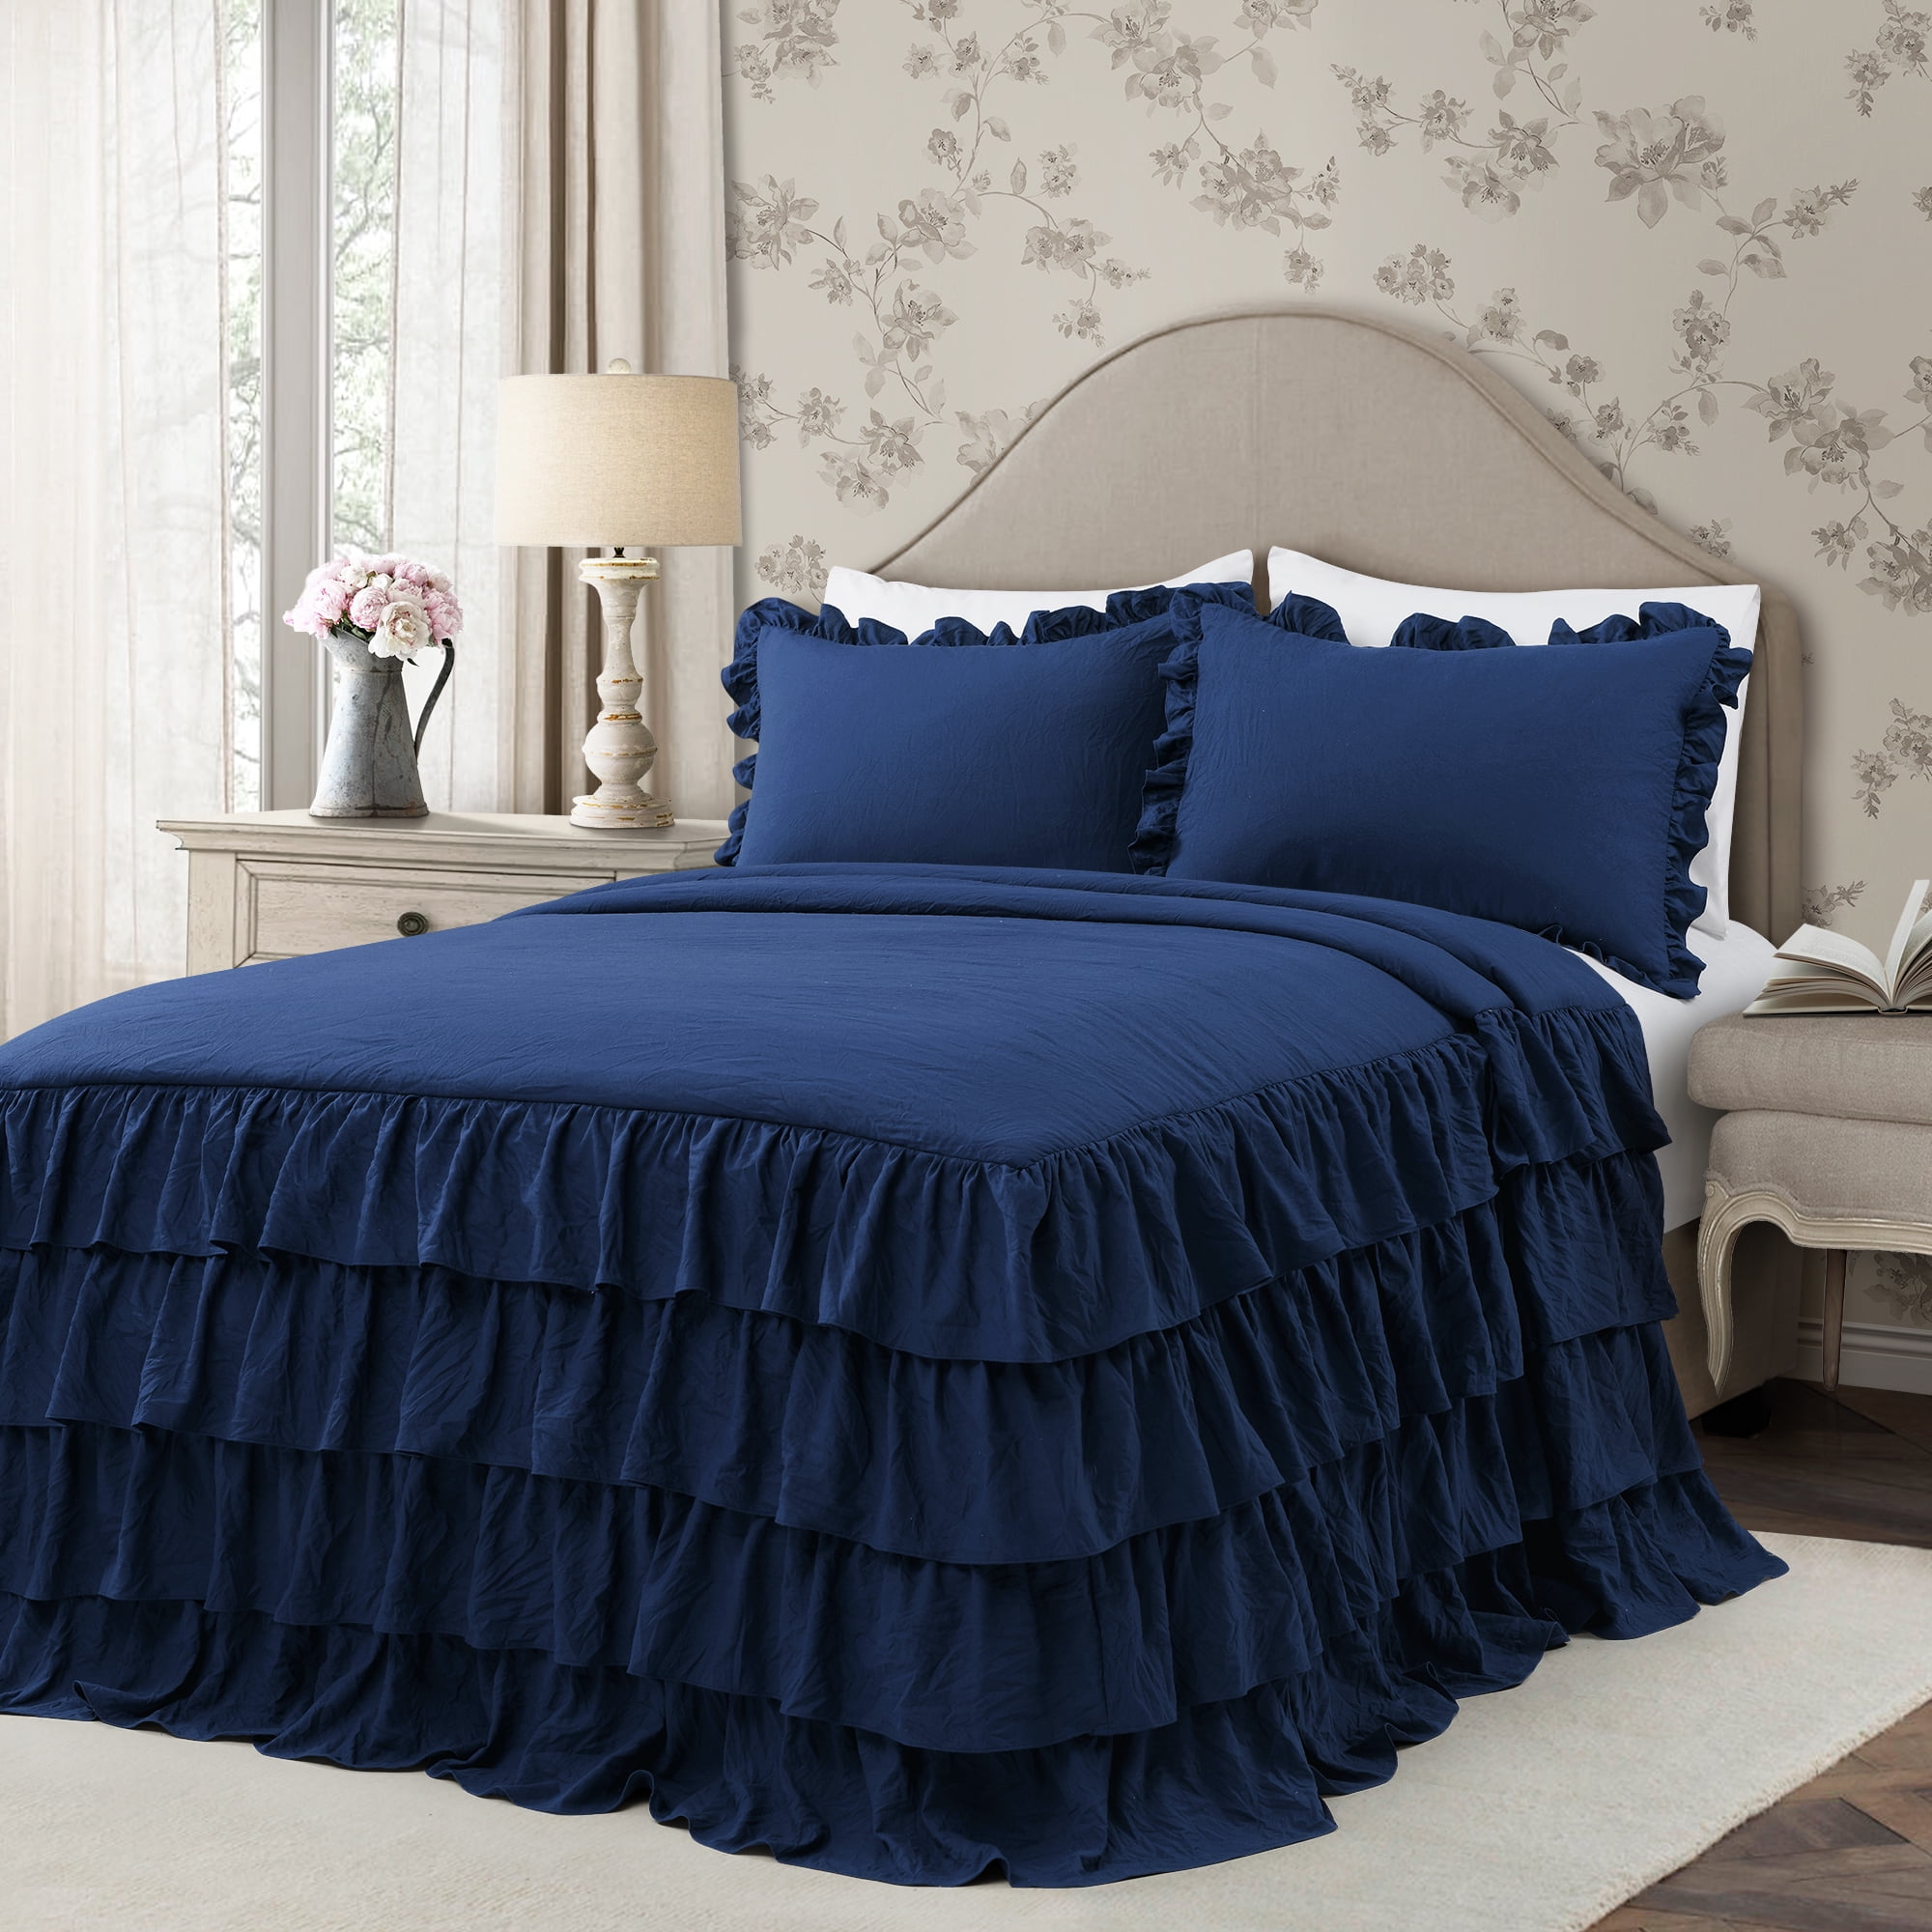 Details about   Solid Elastic Lace Bed Skirt Embroidery Bedding Decor Full/Queen/King Size Decor 